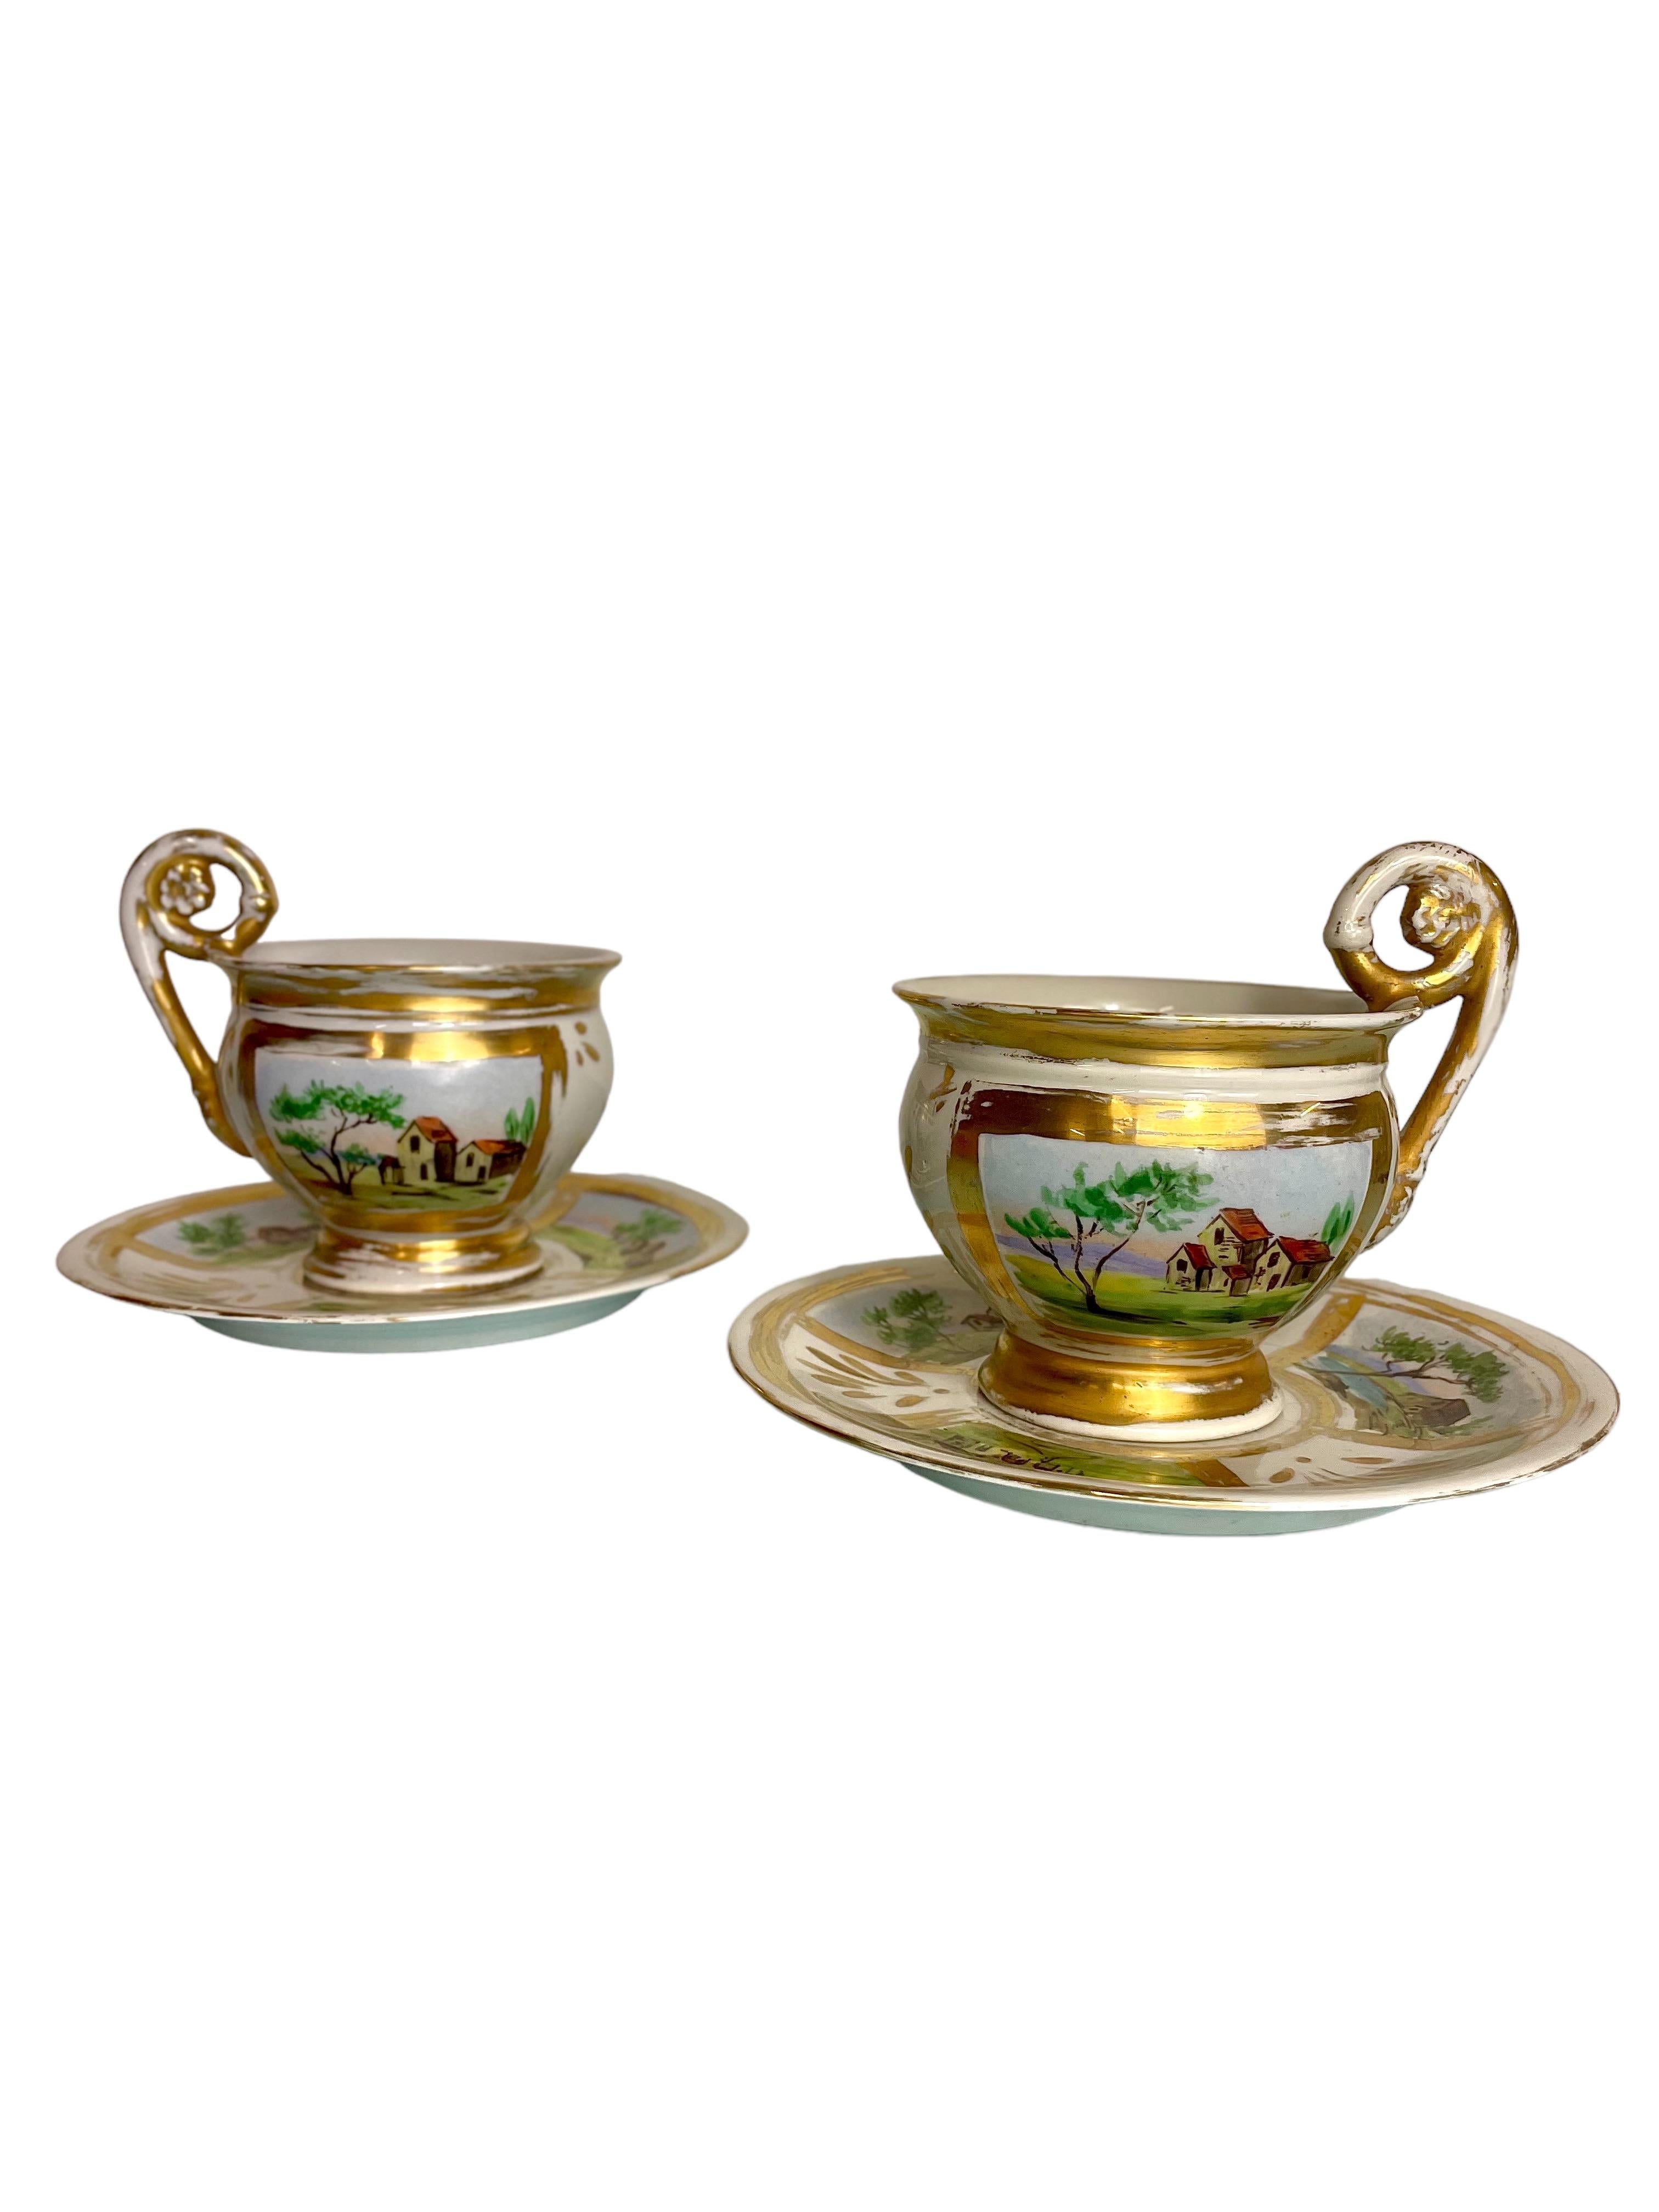 An extremely elegant pair of 'Porcelaine de Paris' breakfast cups, with matching saucers, dating from the early 19th century. 
These sensational cups are decorated with hand-painted countryside scenes, and highlighted with generous bands of